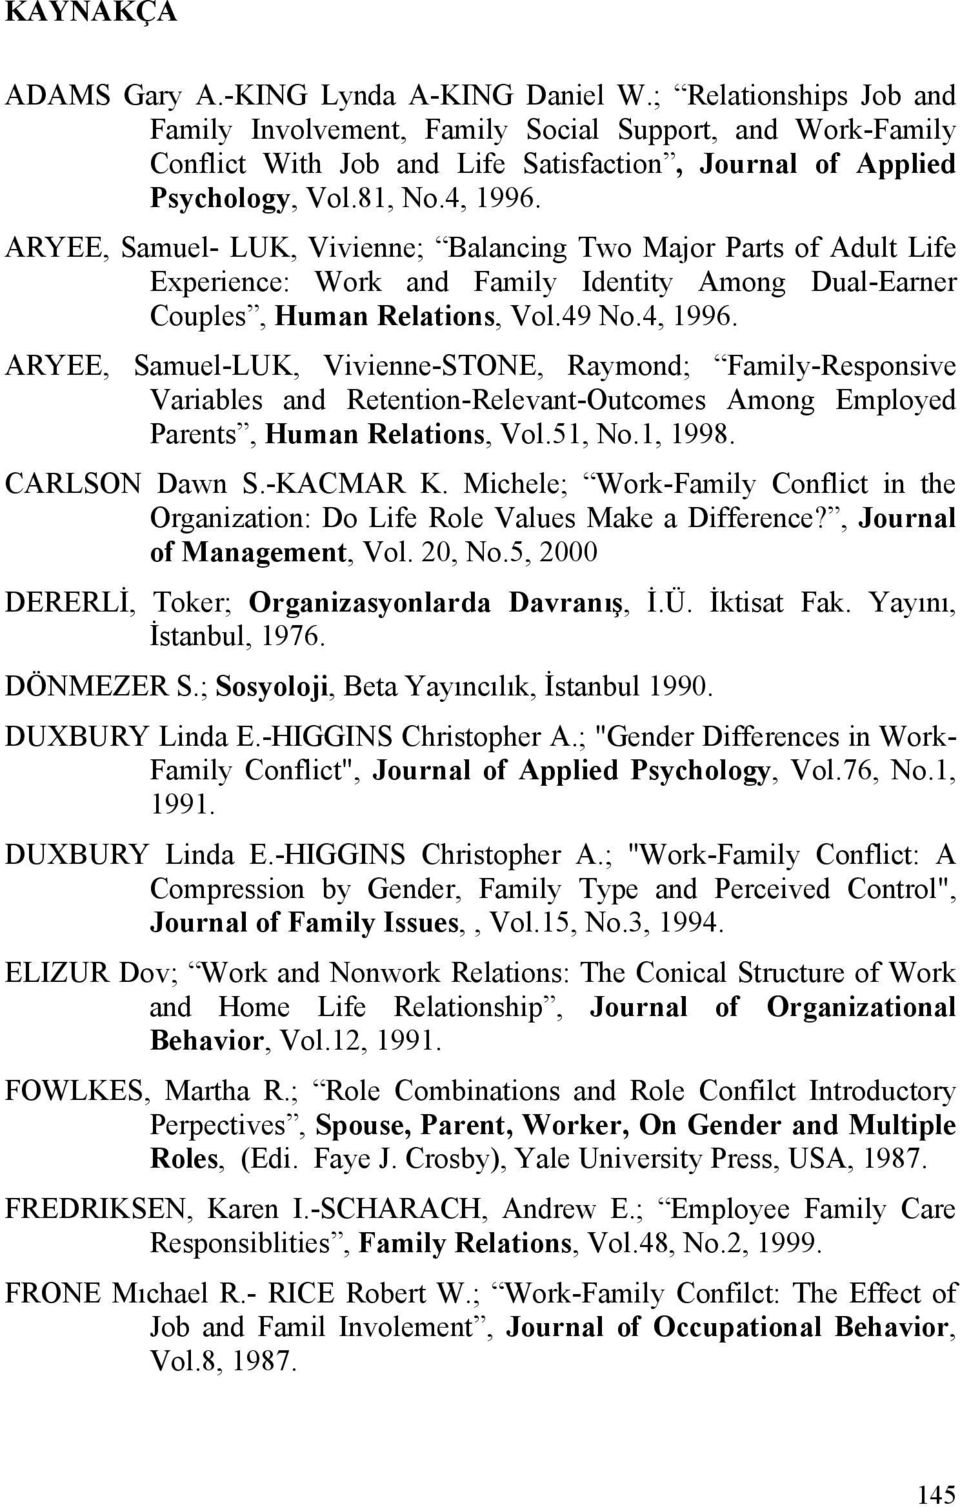 ARYEE, Samuel- LUK, Vivienne; Balancing Two Major Parts of Adult Life Experience: Work and Family Identity Among Dual-Earner Couples, Human Relations, Vol.49 No.4, 1996.